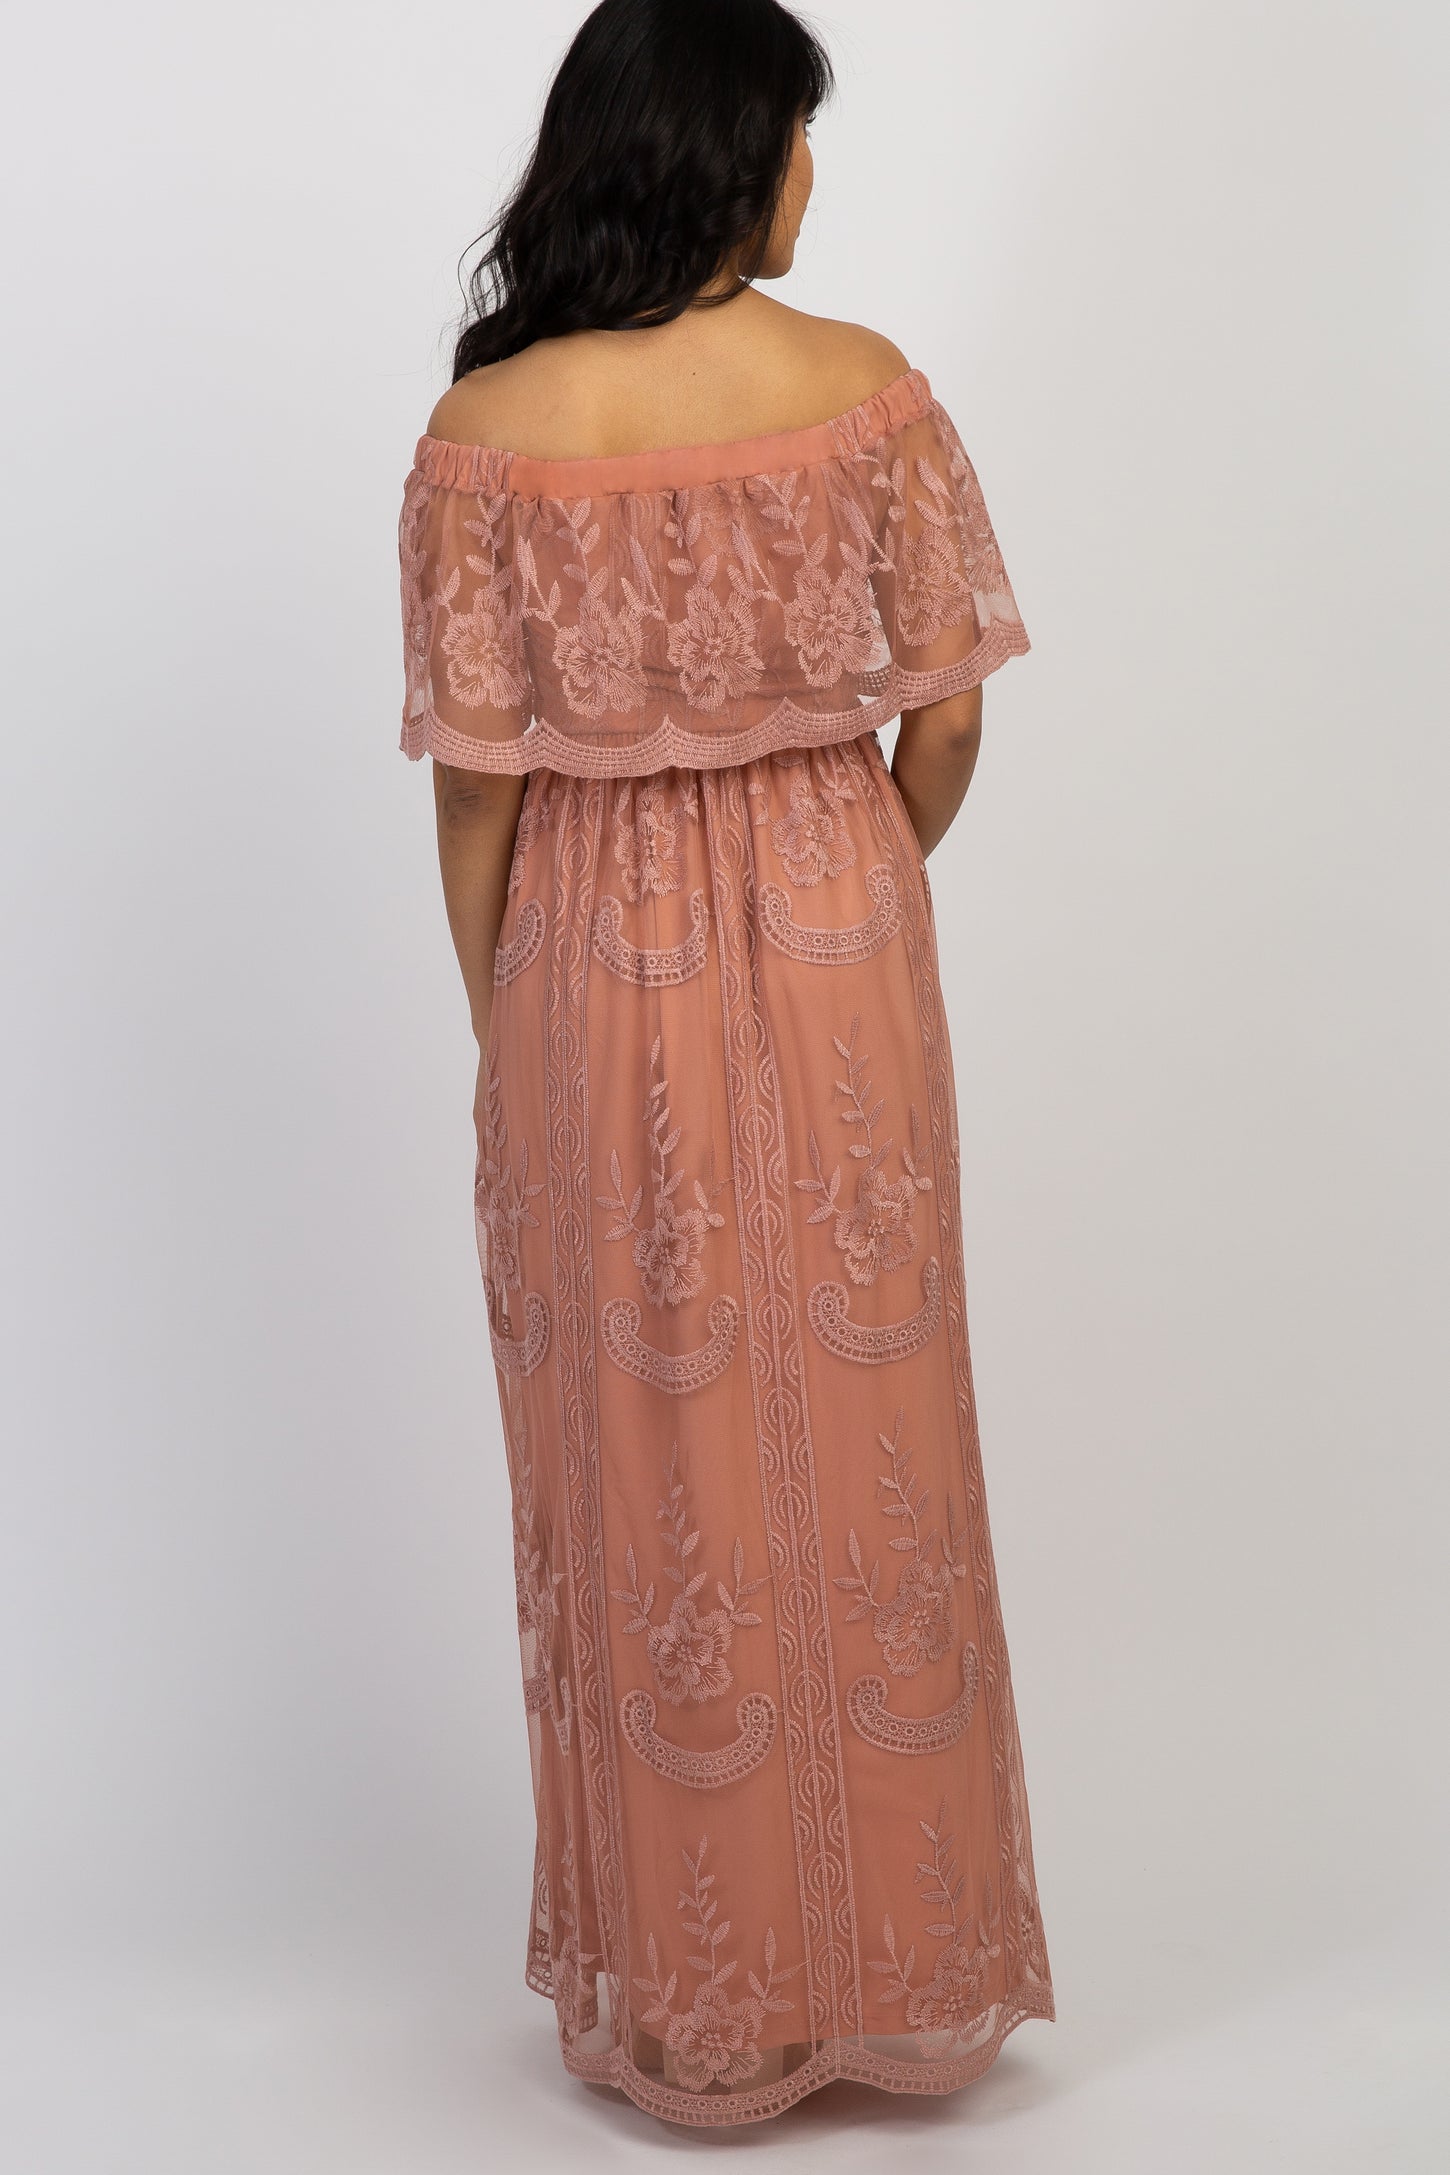 Light Pink Lace Mesh Overlay Off Shoulder Maternity Maxi Dress